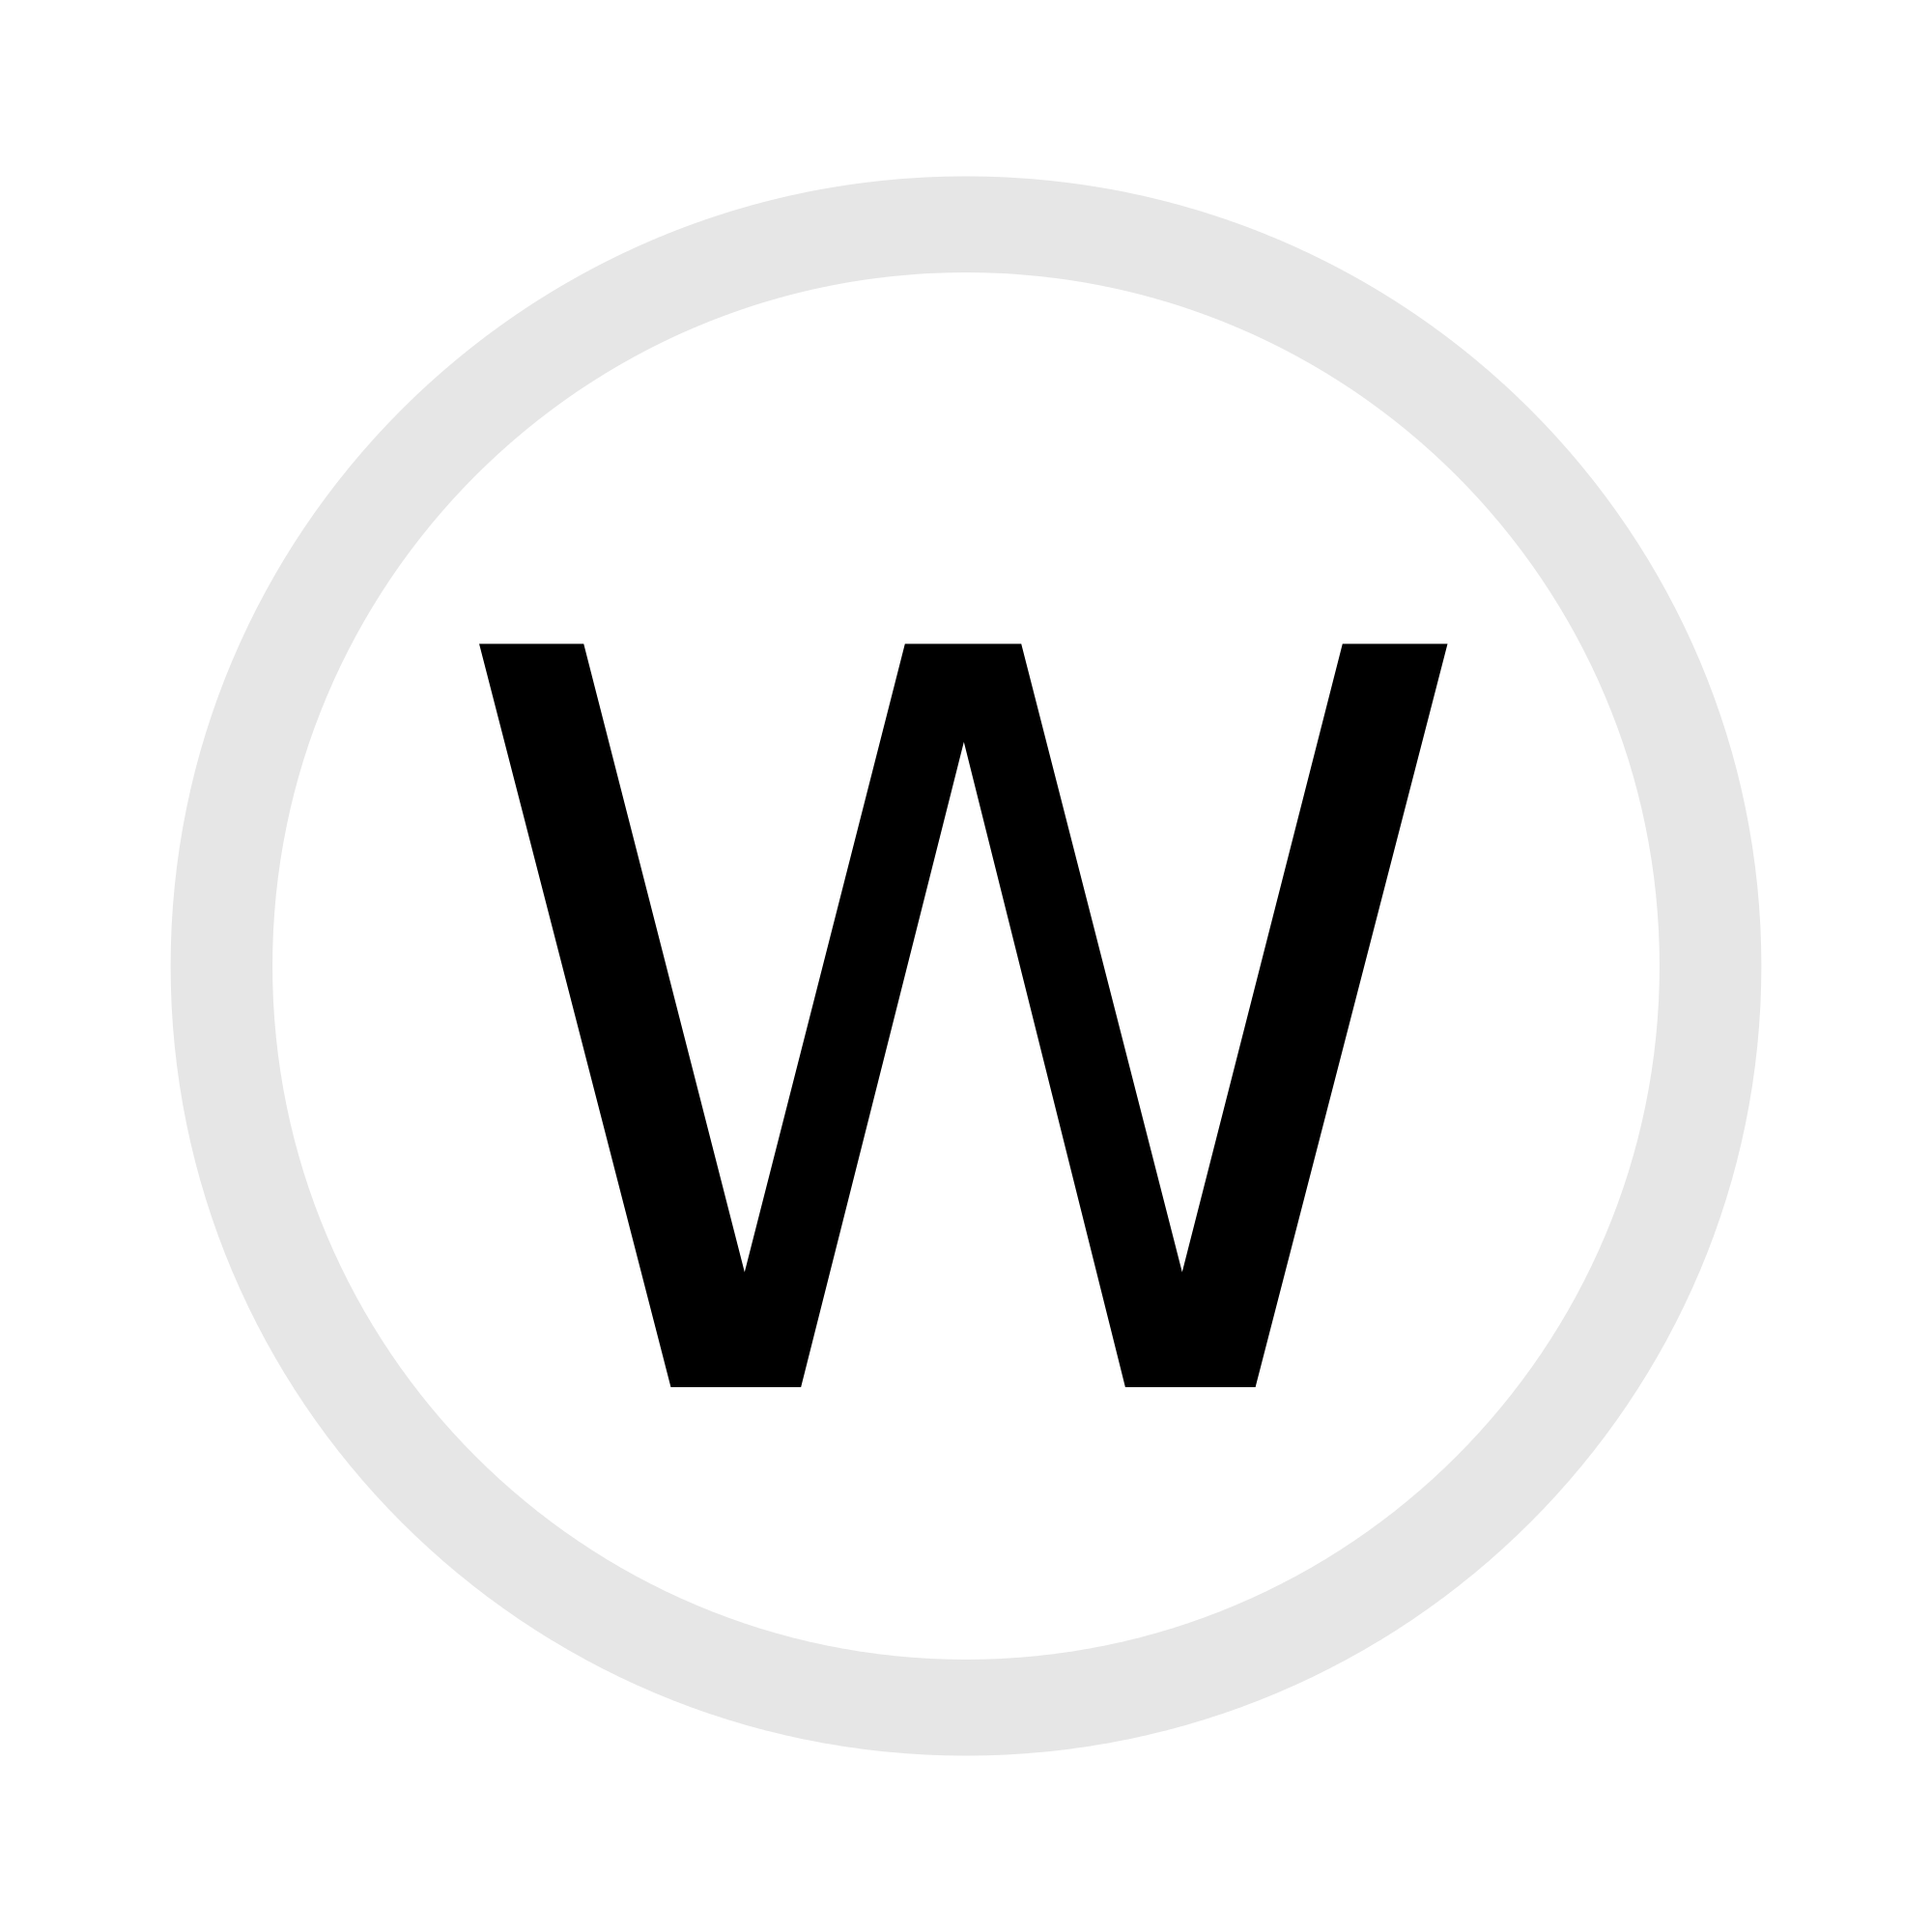 W in Circle Logo - File:W in a circle.svg - Wikimedia Commons